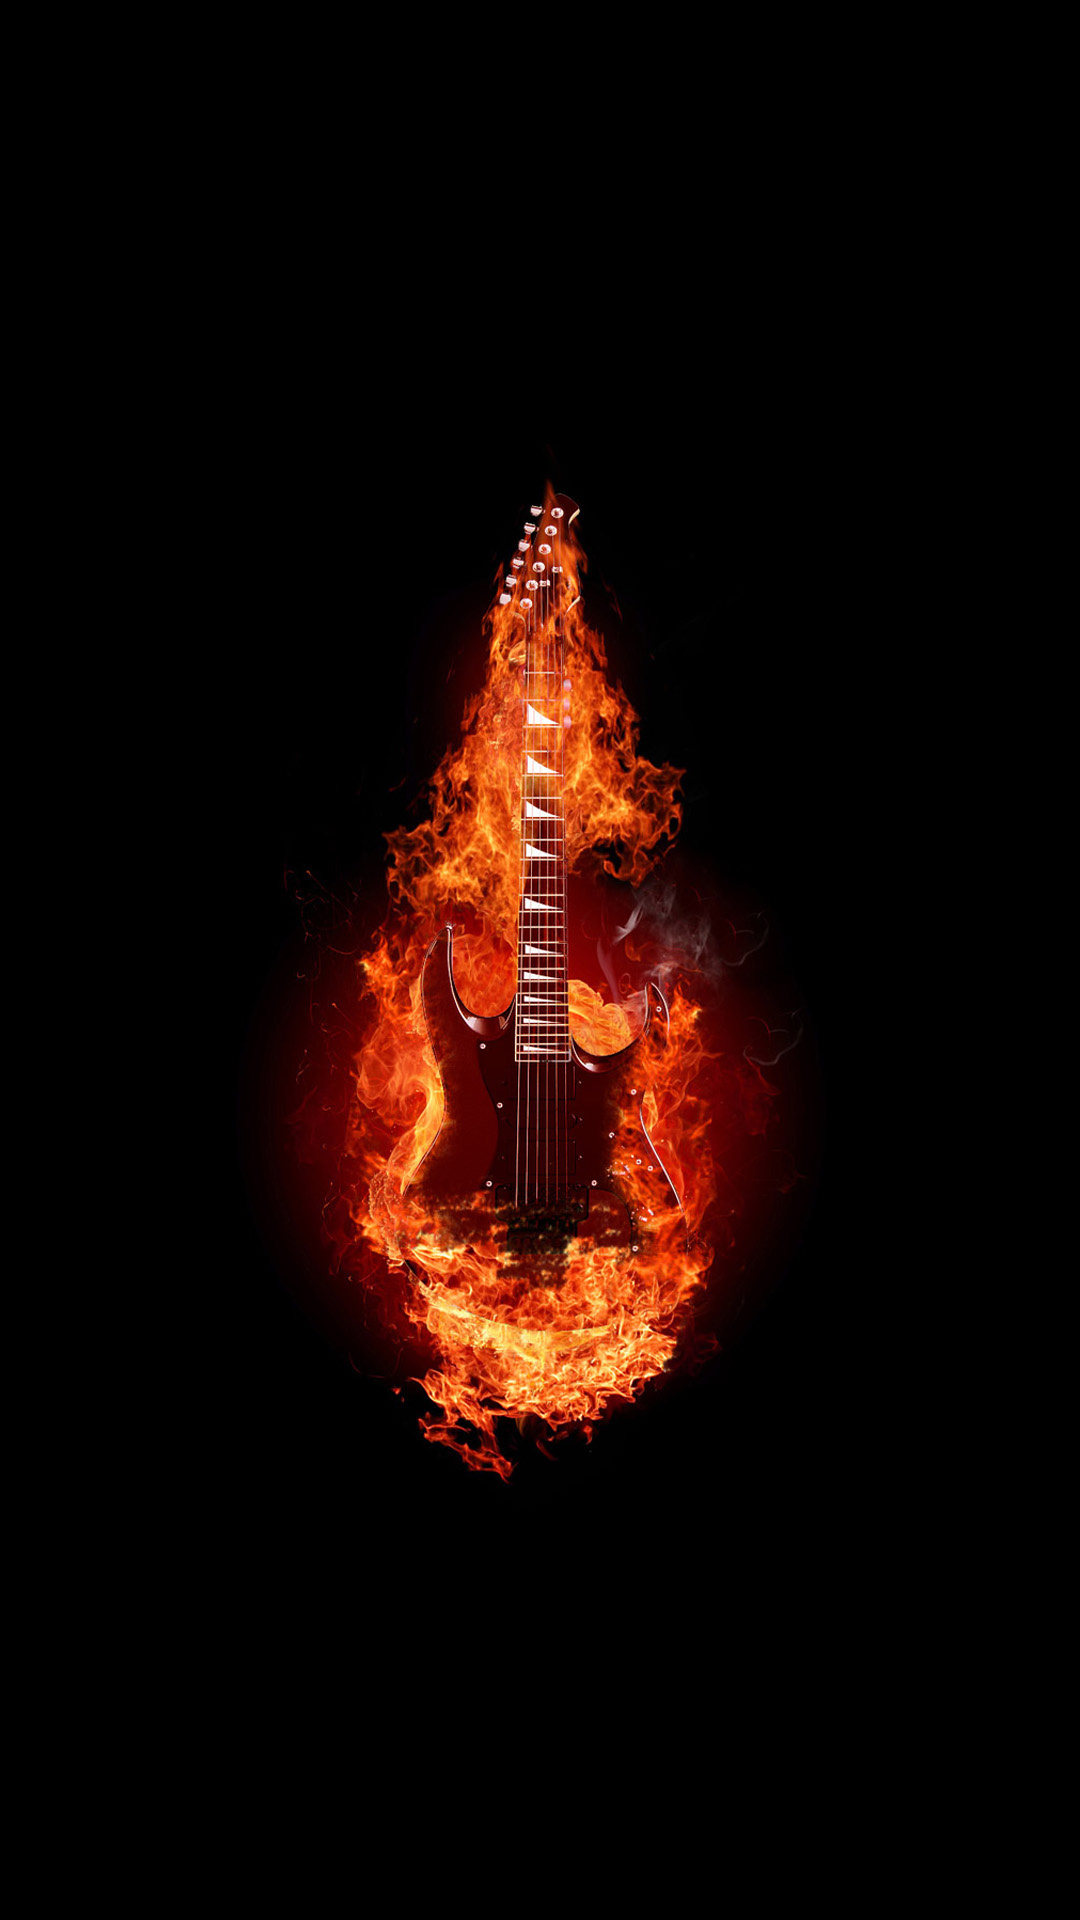 Guitar on fire, Musical inferno, Electric strings, Fiery passion, 1080x1920 Full HD Phone